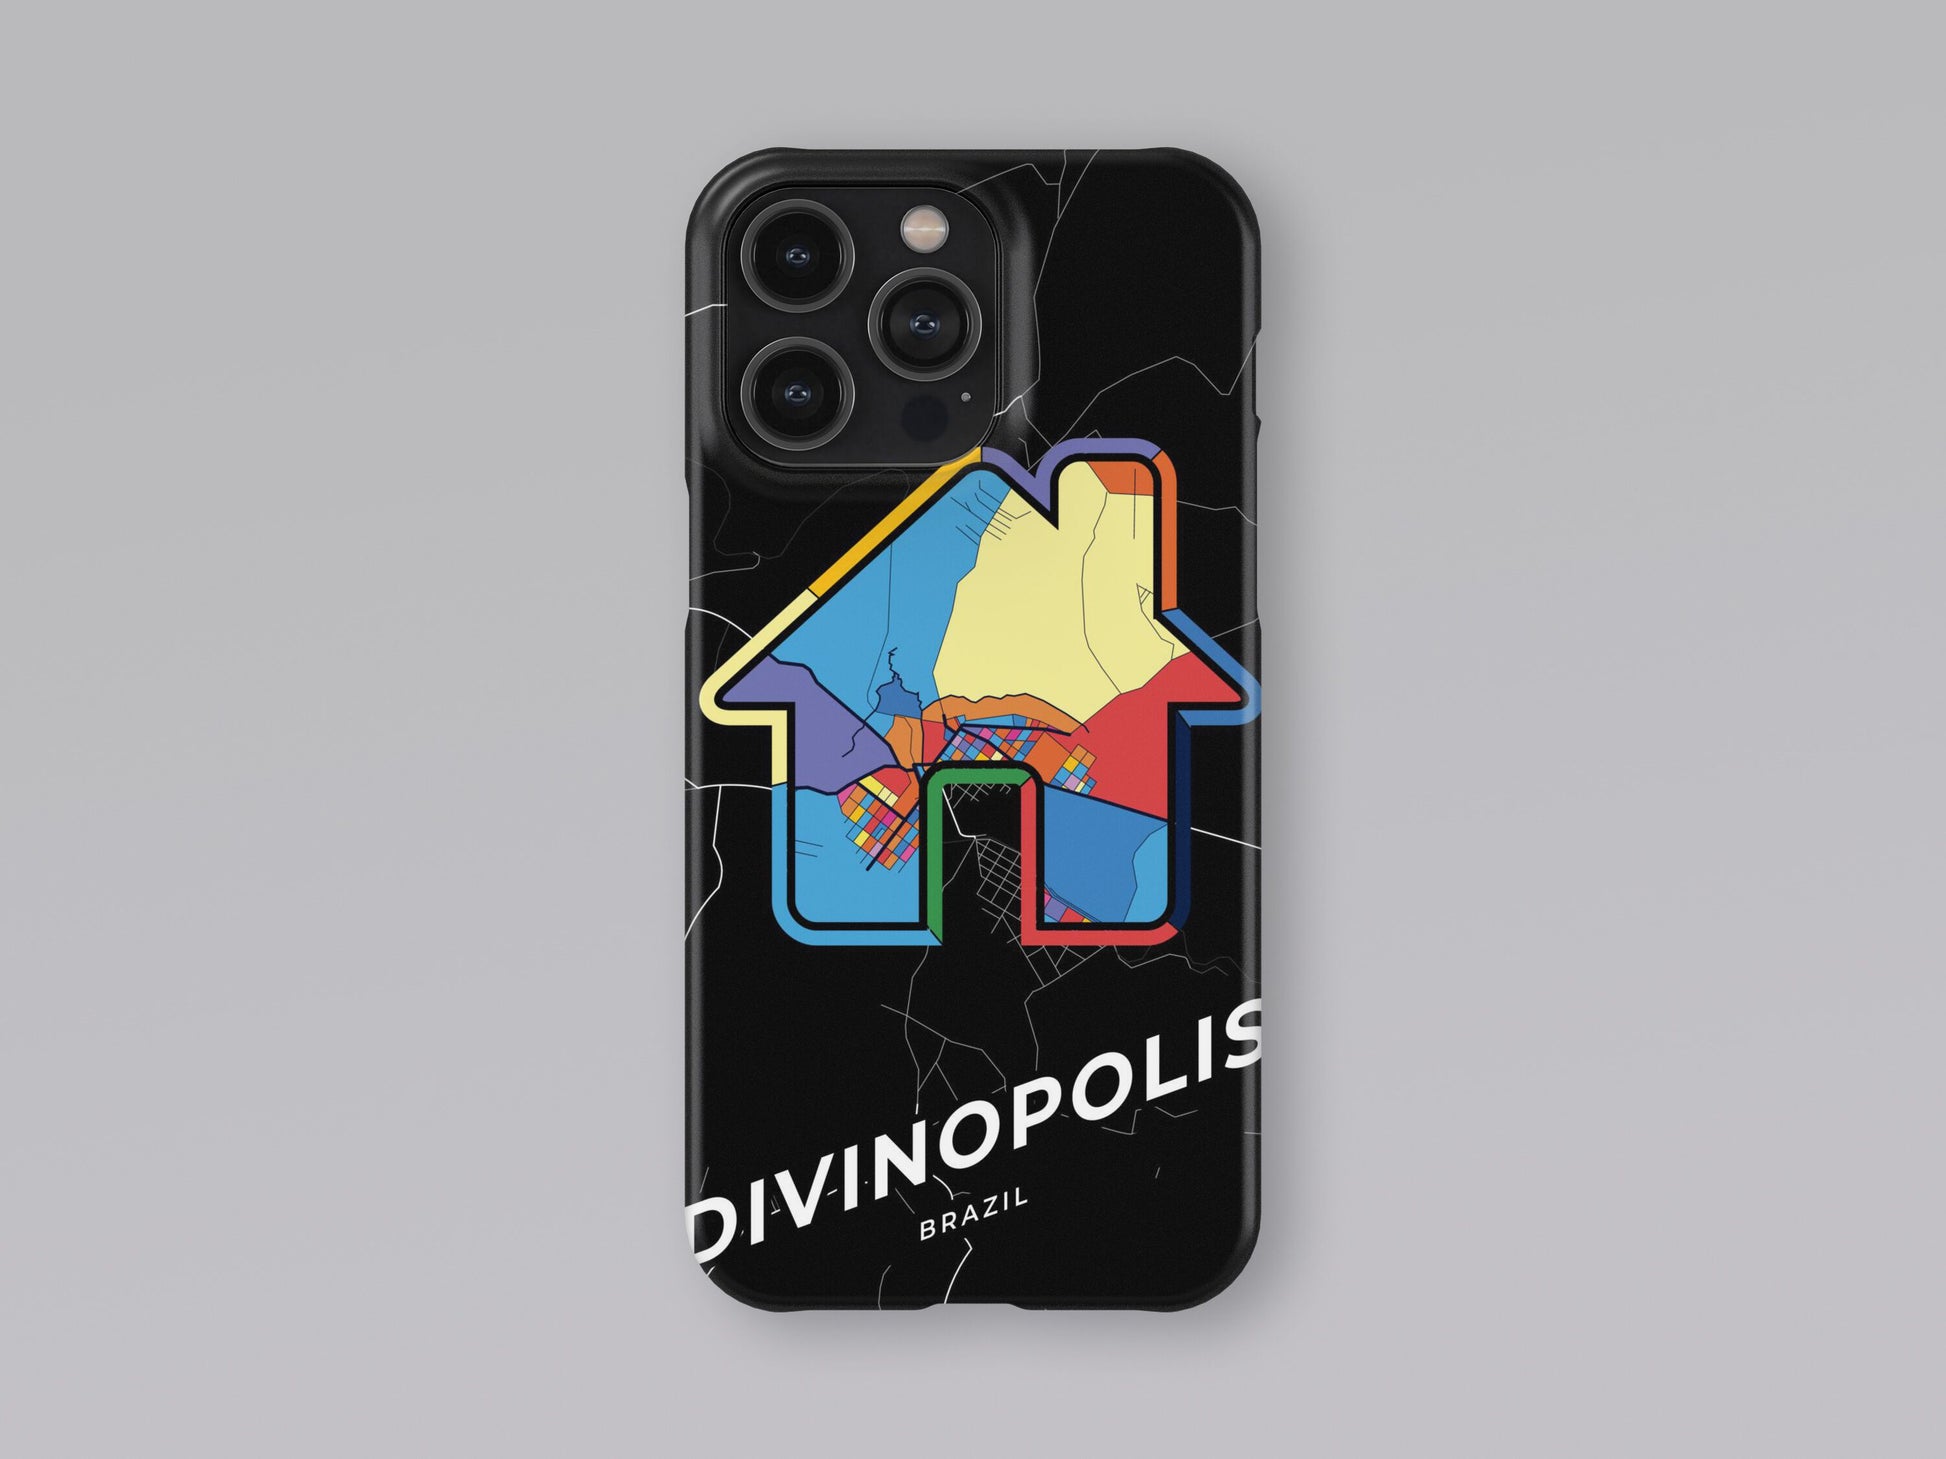 Divinopolis Brazil slim phone case with colorful icon. Birthday, wedding or housewarming gift. Couple match cases. 3